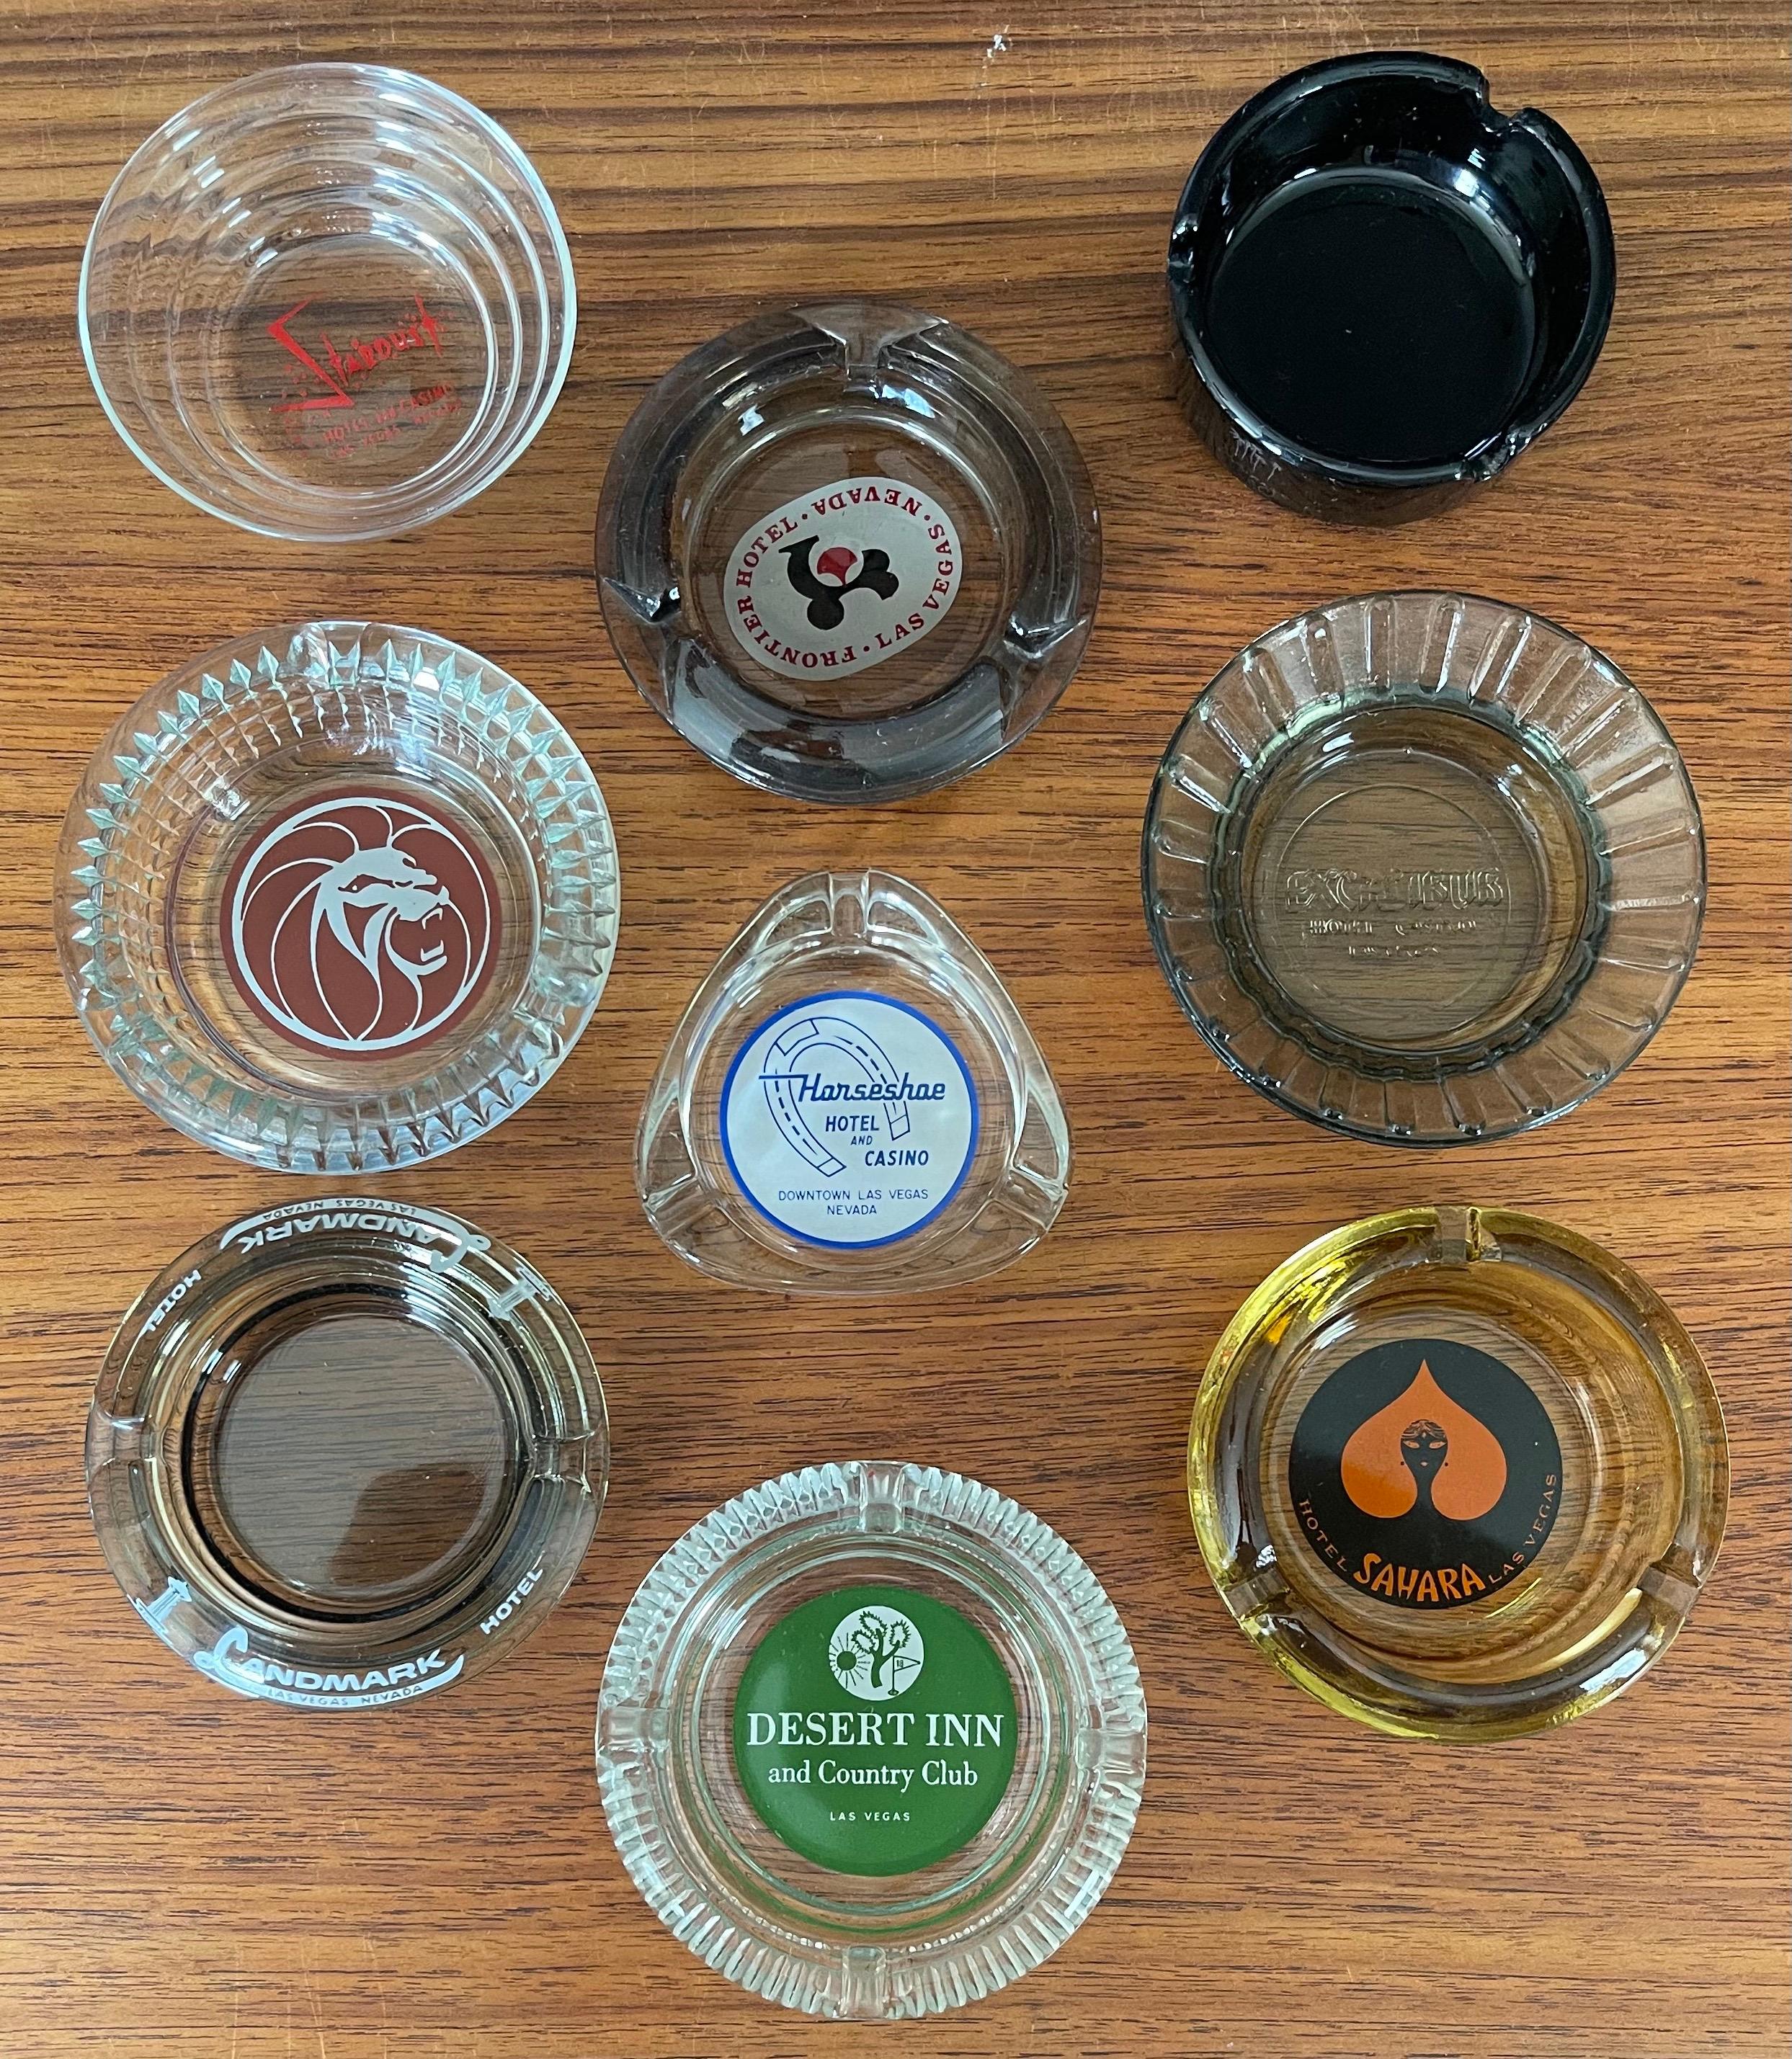 A very cool collection of nine vintage Las Vegas casino ashtrays circa 1970s. All of the ashtrays are in very good vintage condition with no chips or cracks and clear, crisp graphics. On average, they measure 4